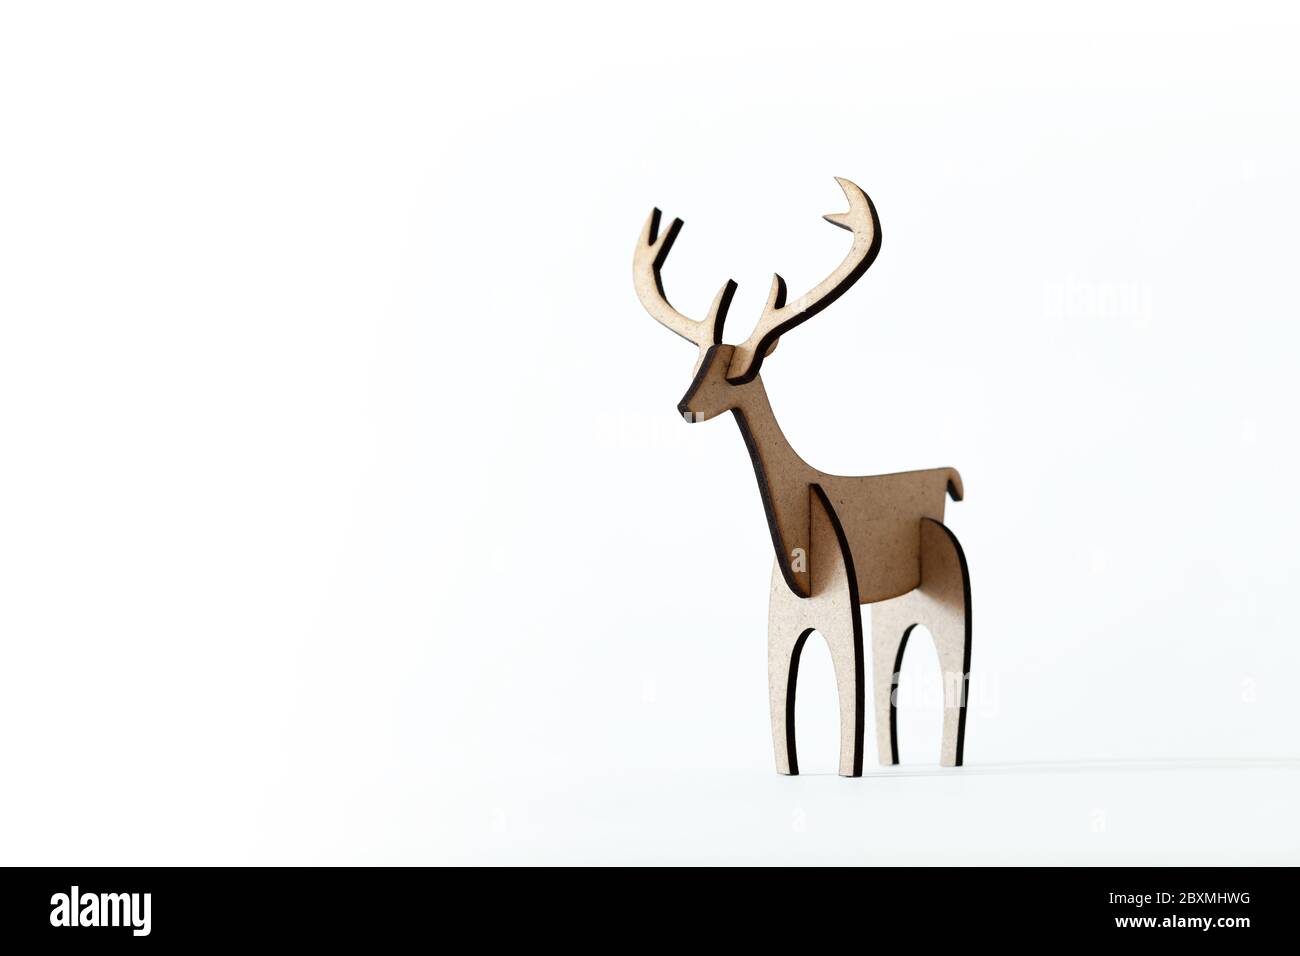 Single reindeer cardboard toy isolated on a white background. Christmas icon with Text space Stock Photo